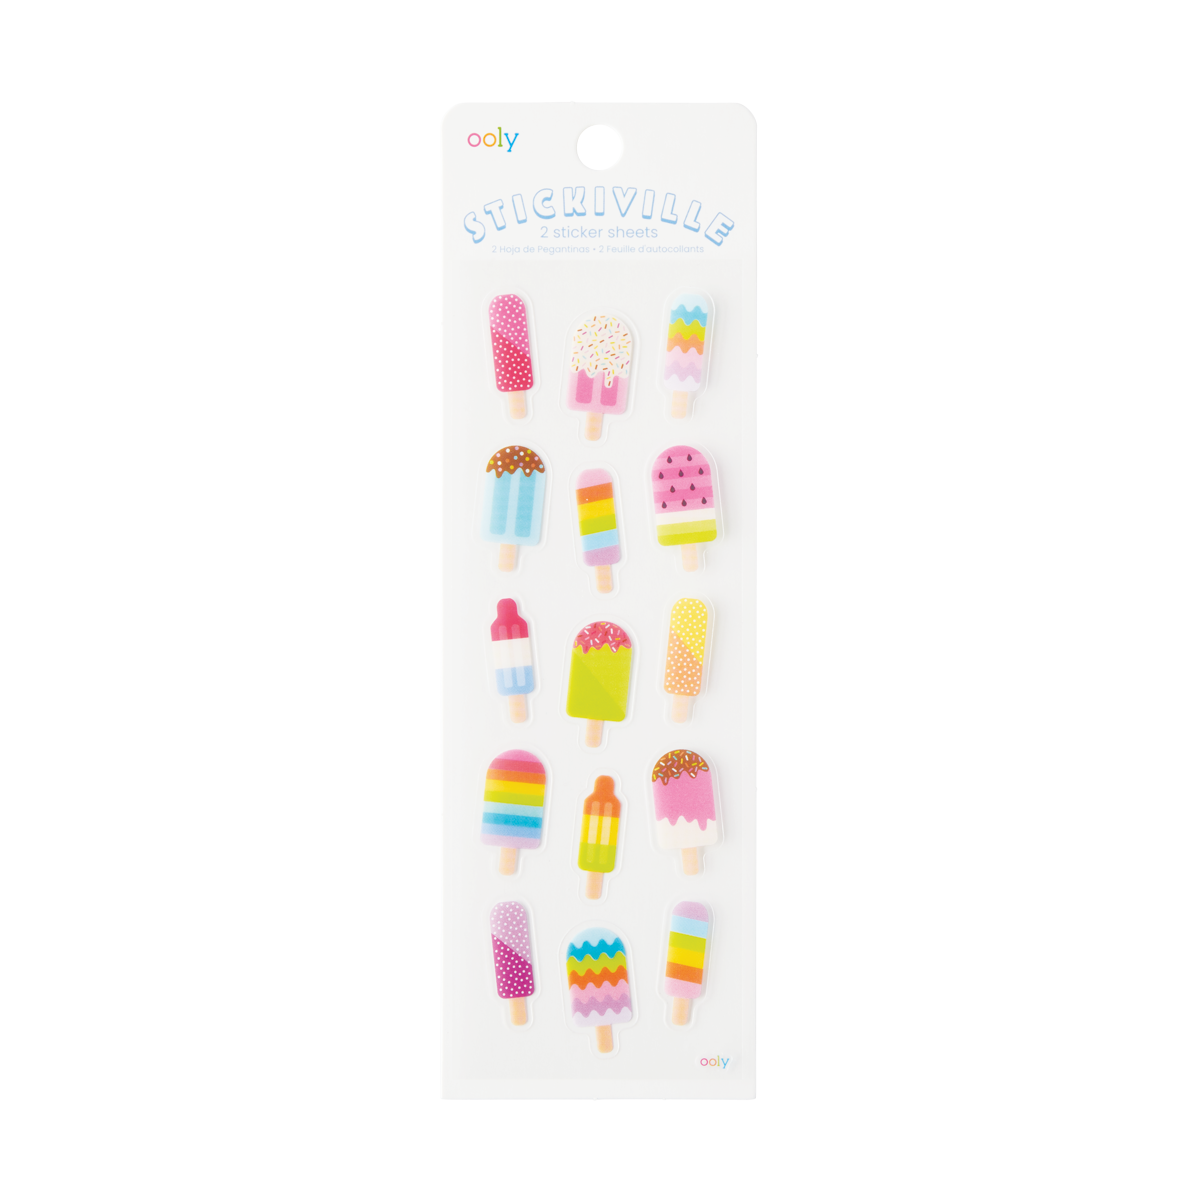 OOLY Stickiville Ice Pop stickers in packaging